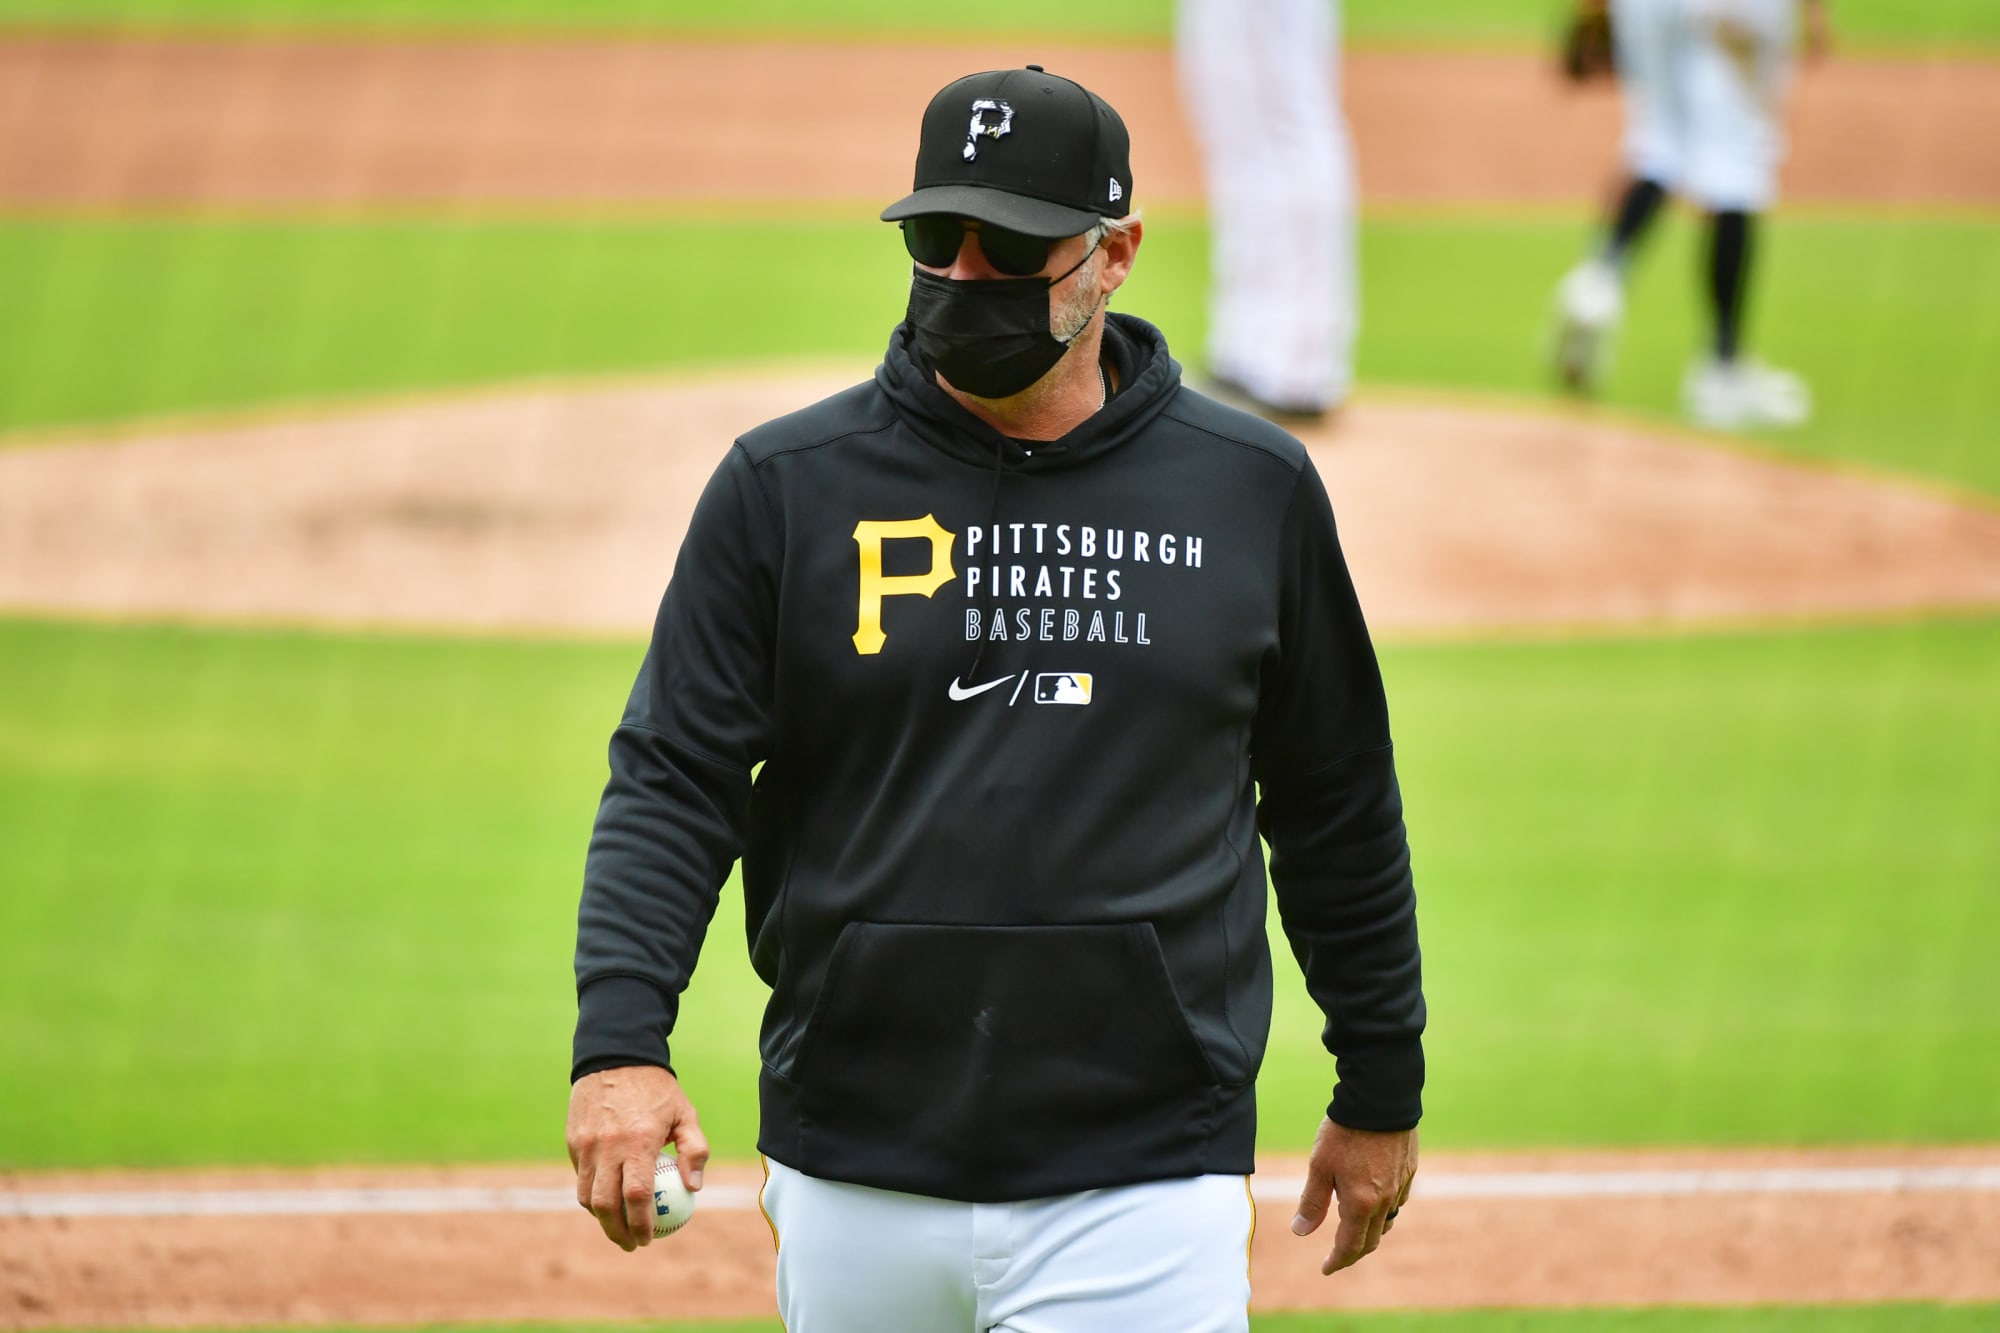 Pittsburgh Pirates Club Finalizes Their Opening Day Roster